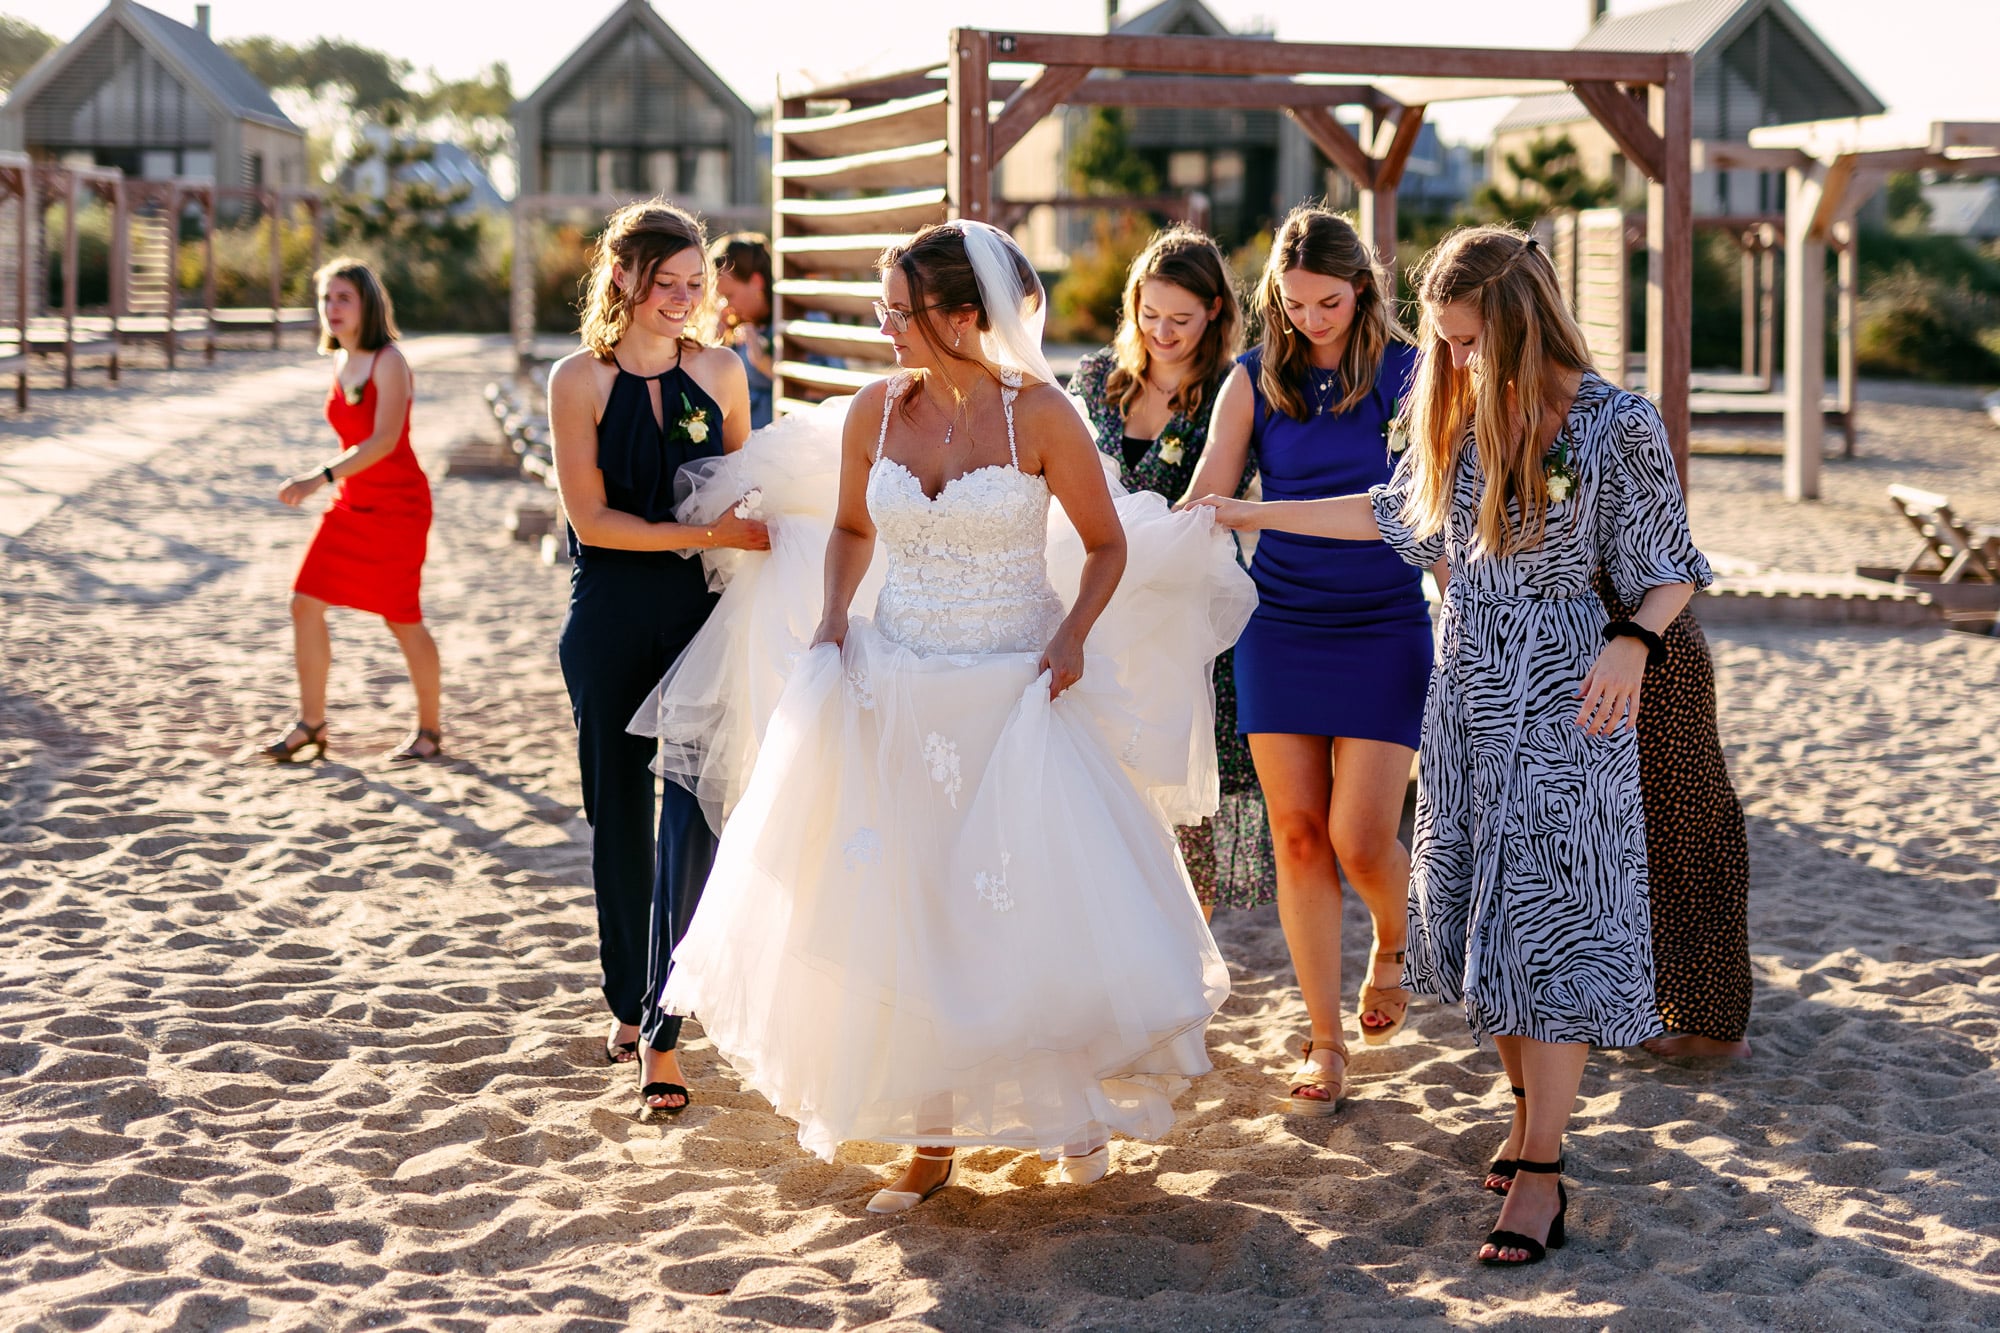 A wedding day bride and her bridesmaids walk on the beach.